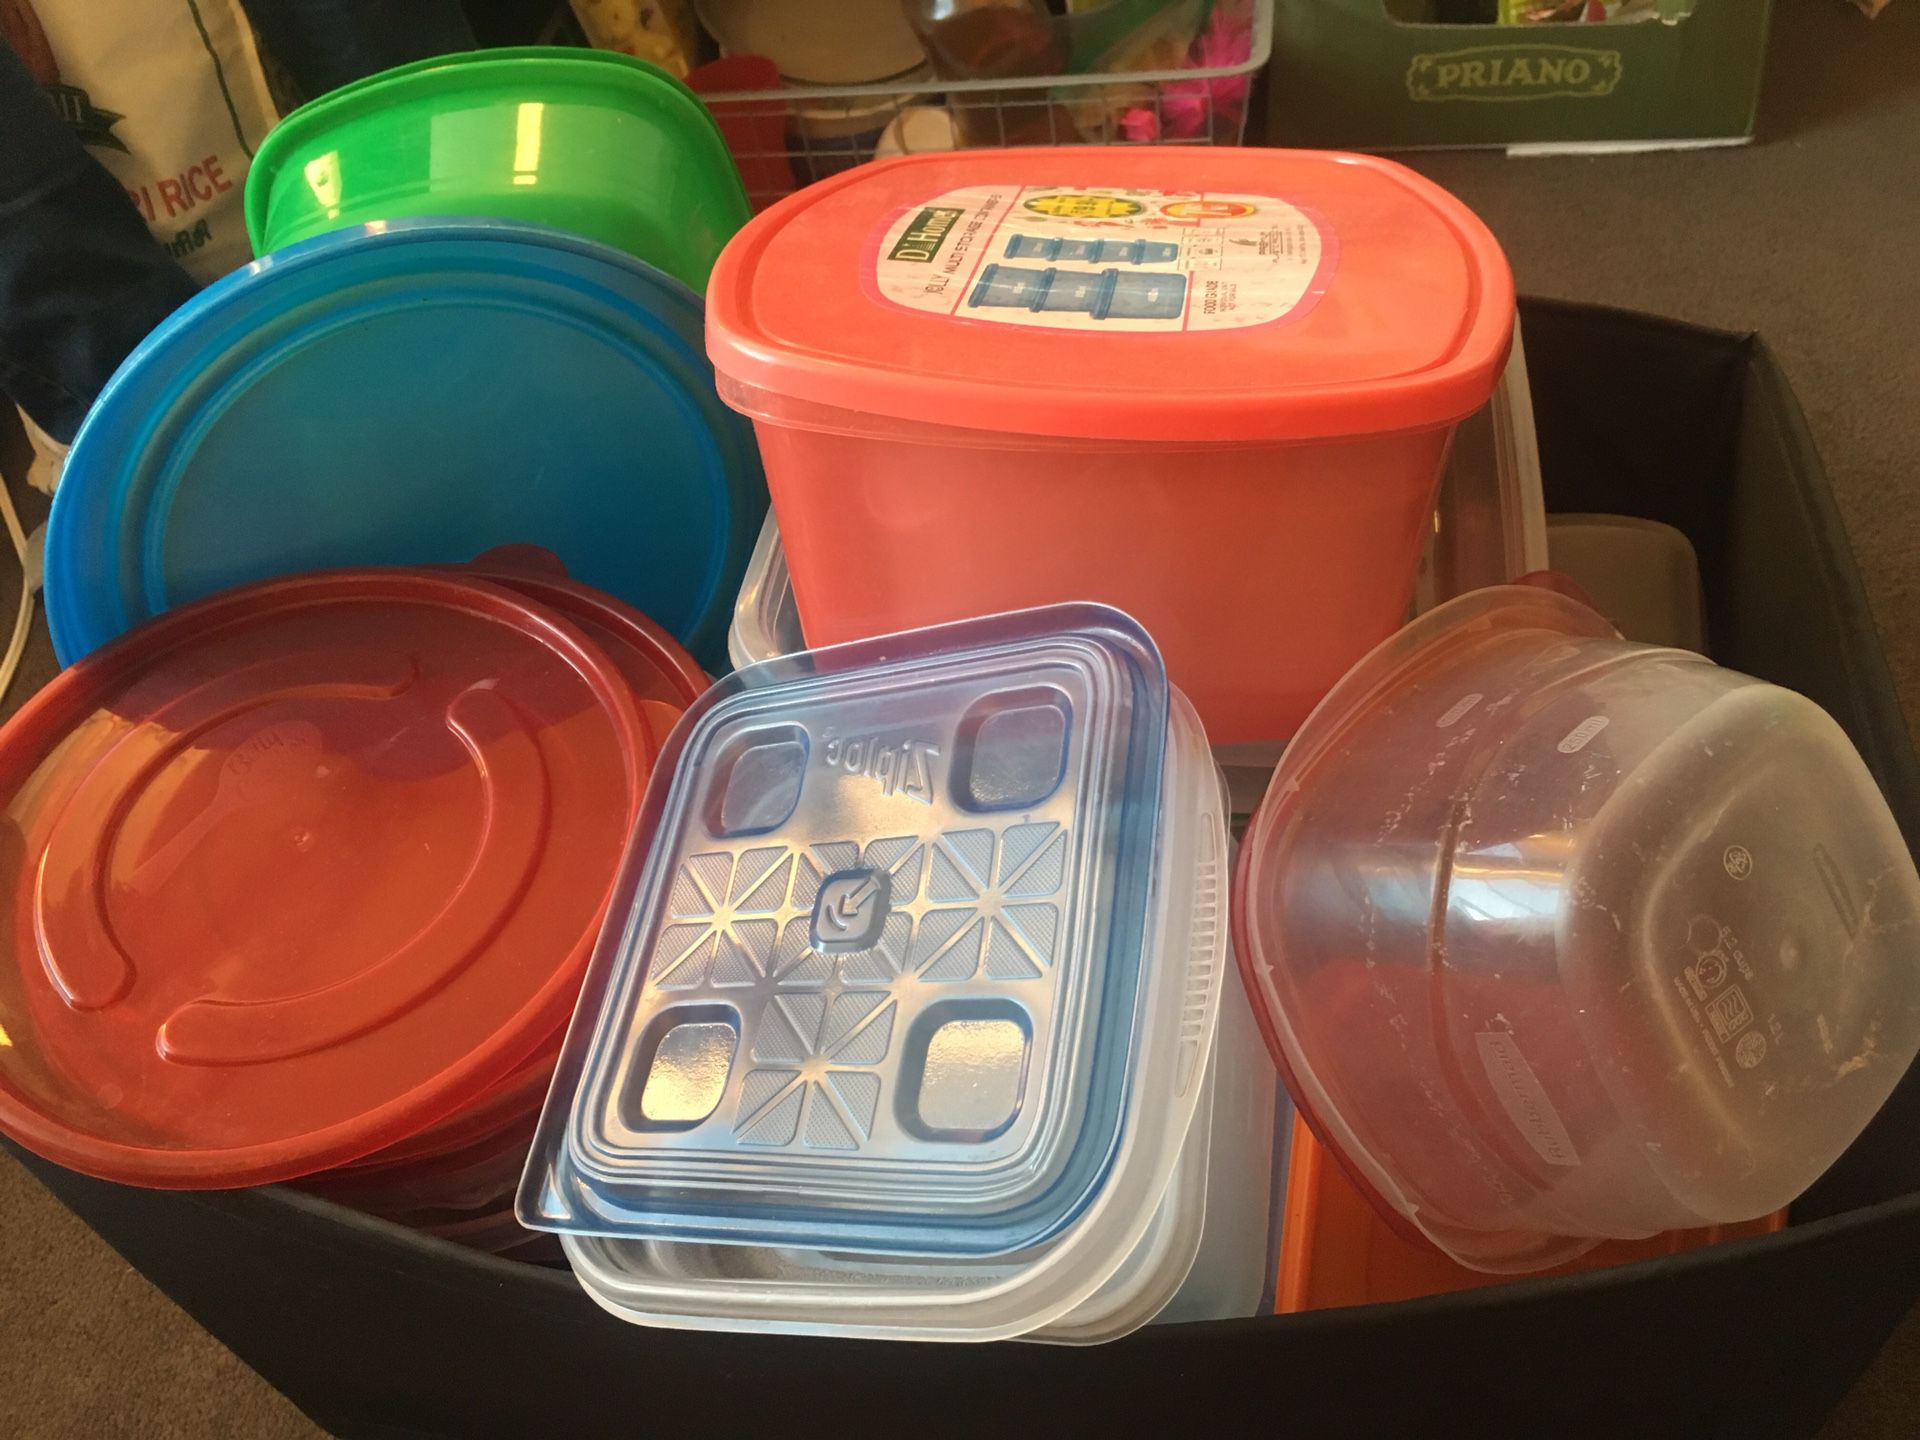 Plastic storage containers and boxes